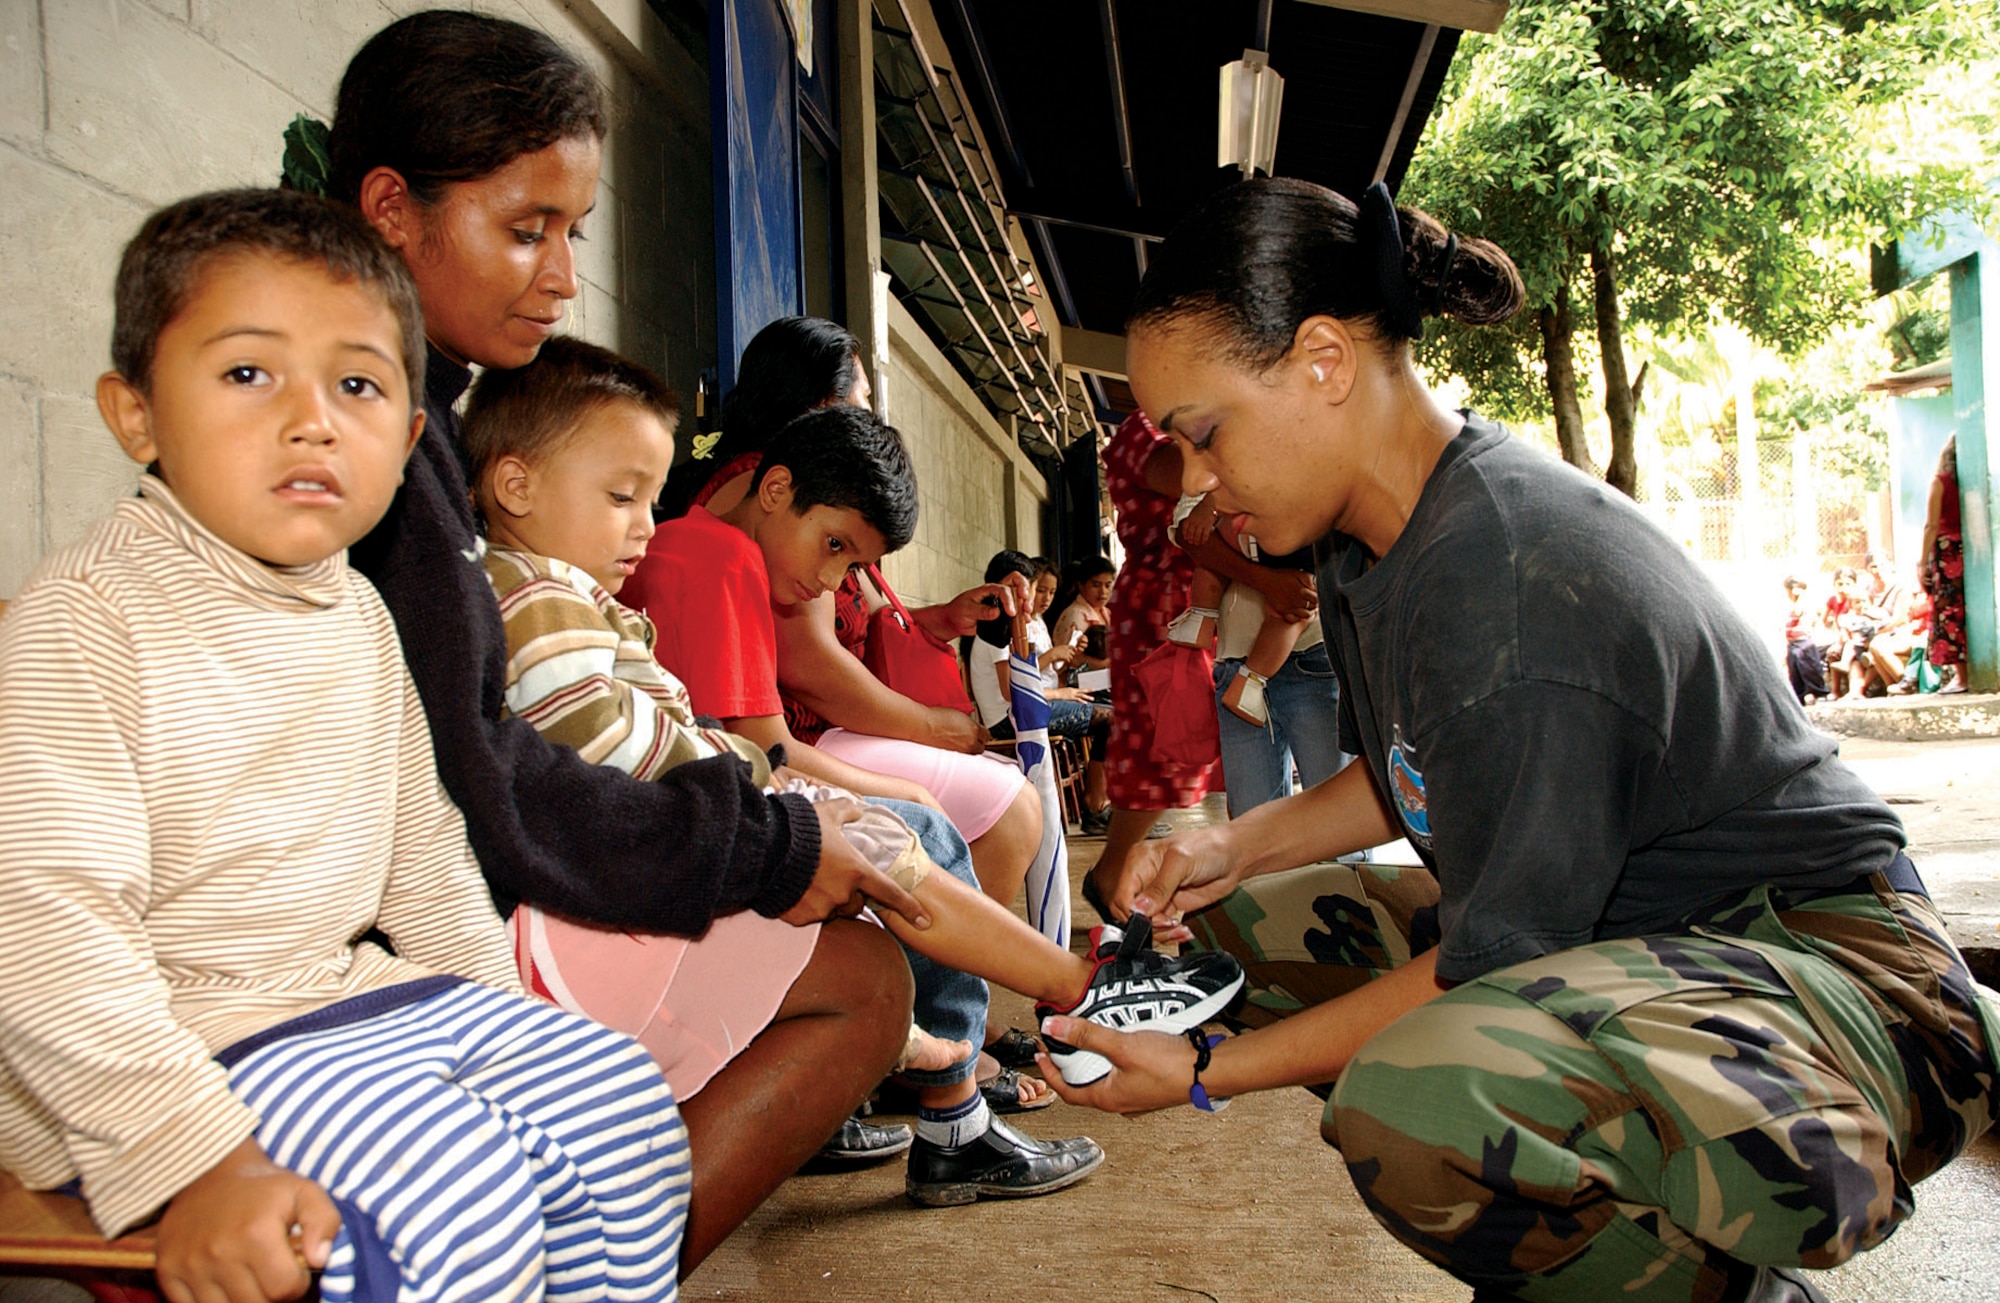 Master Sgt. Tina Williams, 163d Reconnaissance Wing budget analyst, puts a new pair of shoes on a young Guatemalan boy. Sergeant Williams accompanied the 163d Medical Group to ensure the team was able to purchase needed supplies at each site.  (U.S. Air Force photo by Capt Al Bosco, 163RW/PA)